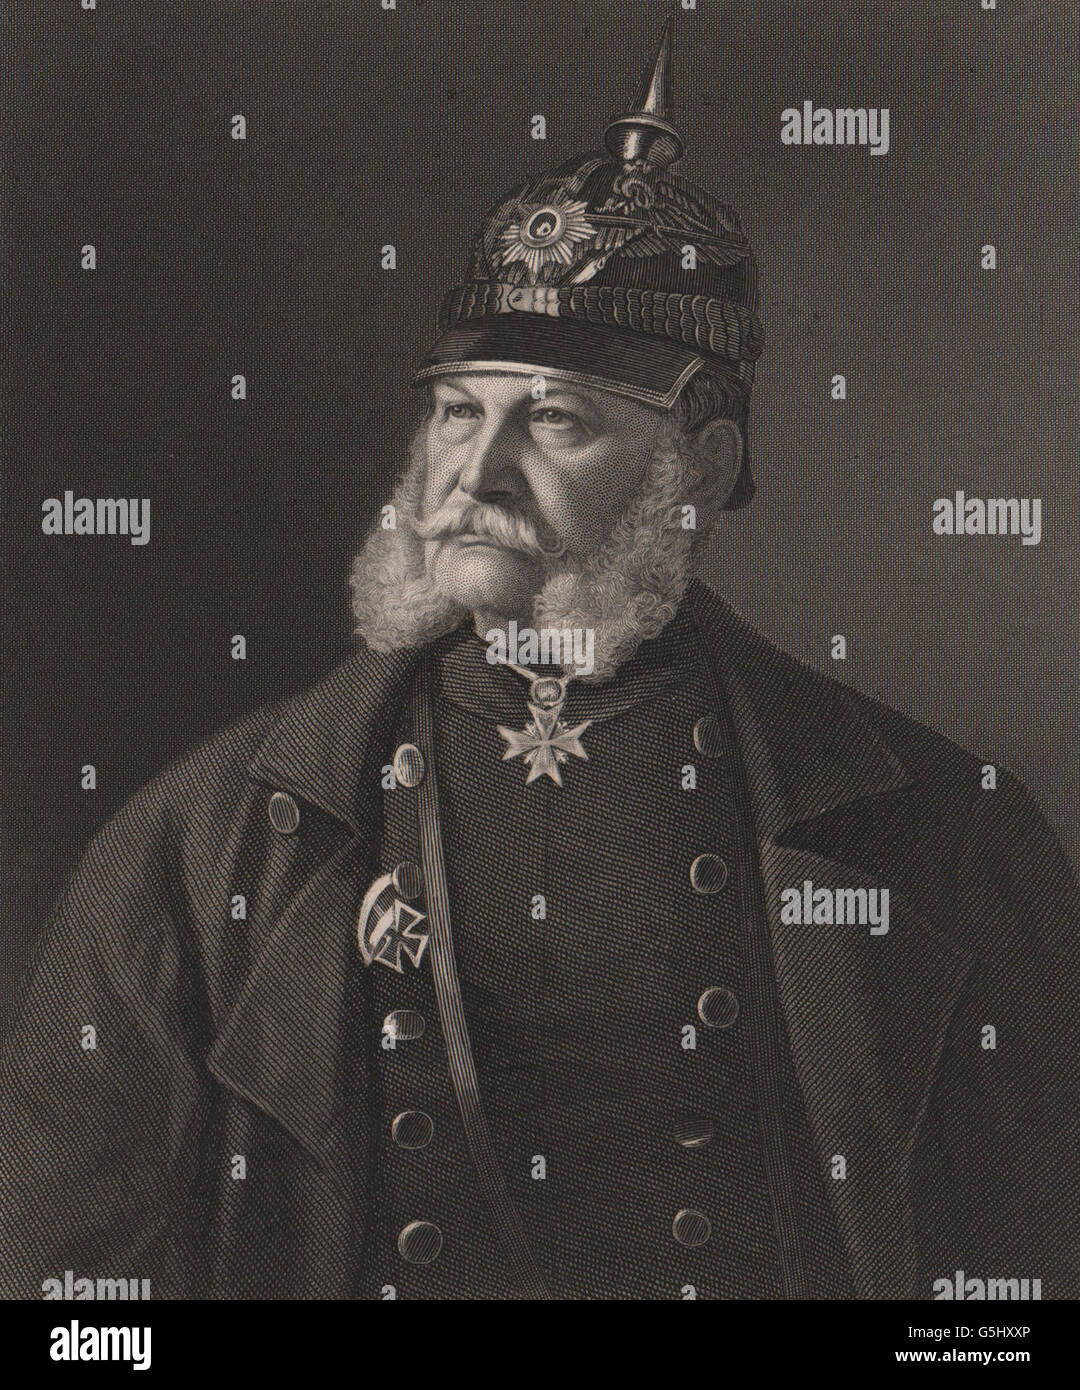 FRANCO-PRUSSIAN WAR: William, I. King of Prussia & Emperor of Germany, 1875 Stock Photo